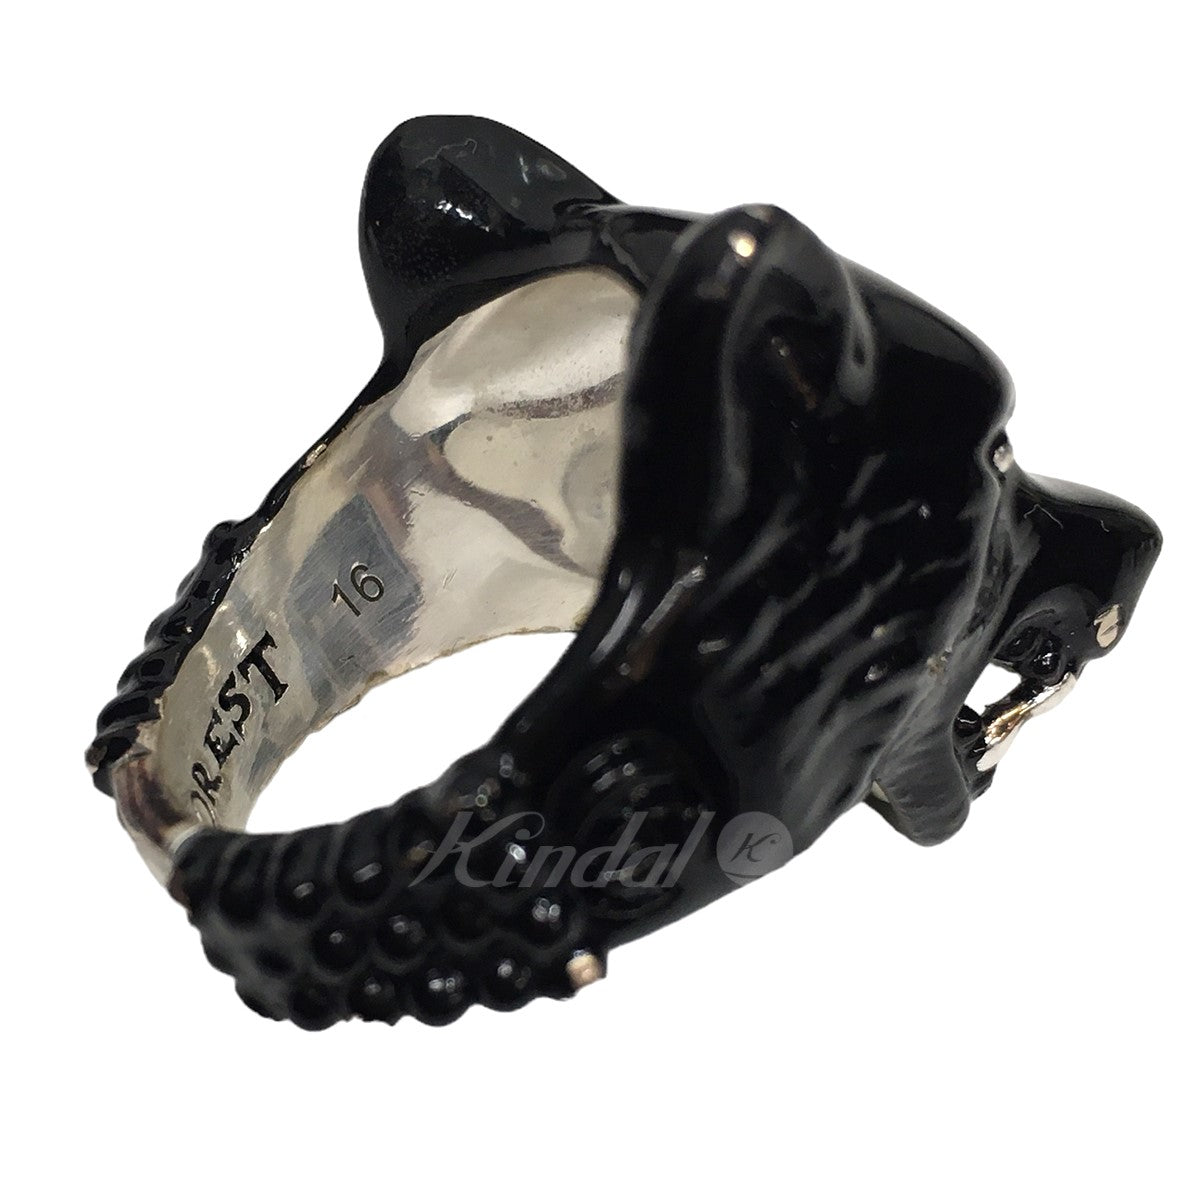 GUCCI(グッチ) ANGER FOREST WOLF RING アンガーフォレスト ウルフリング